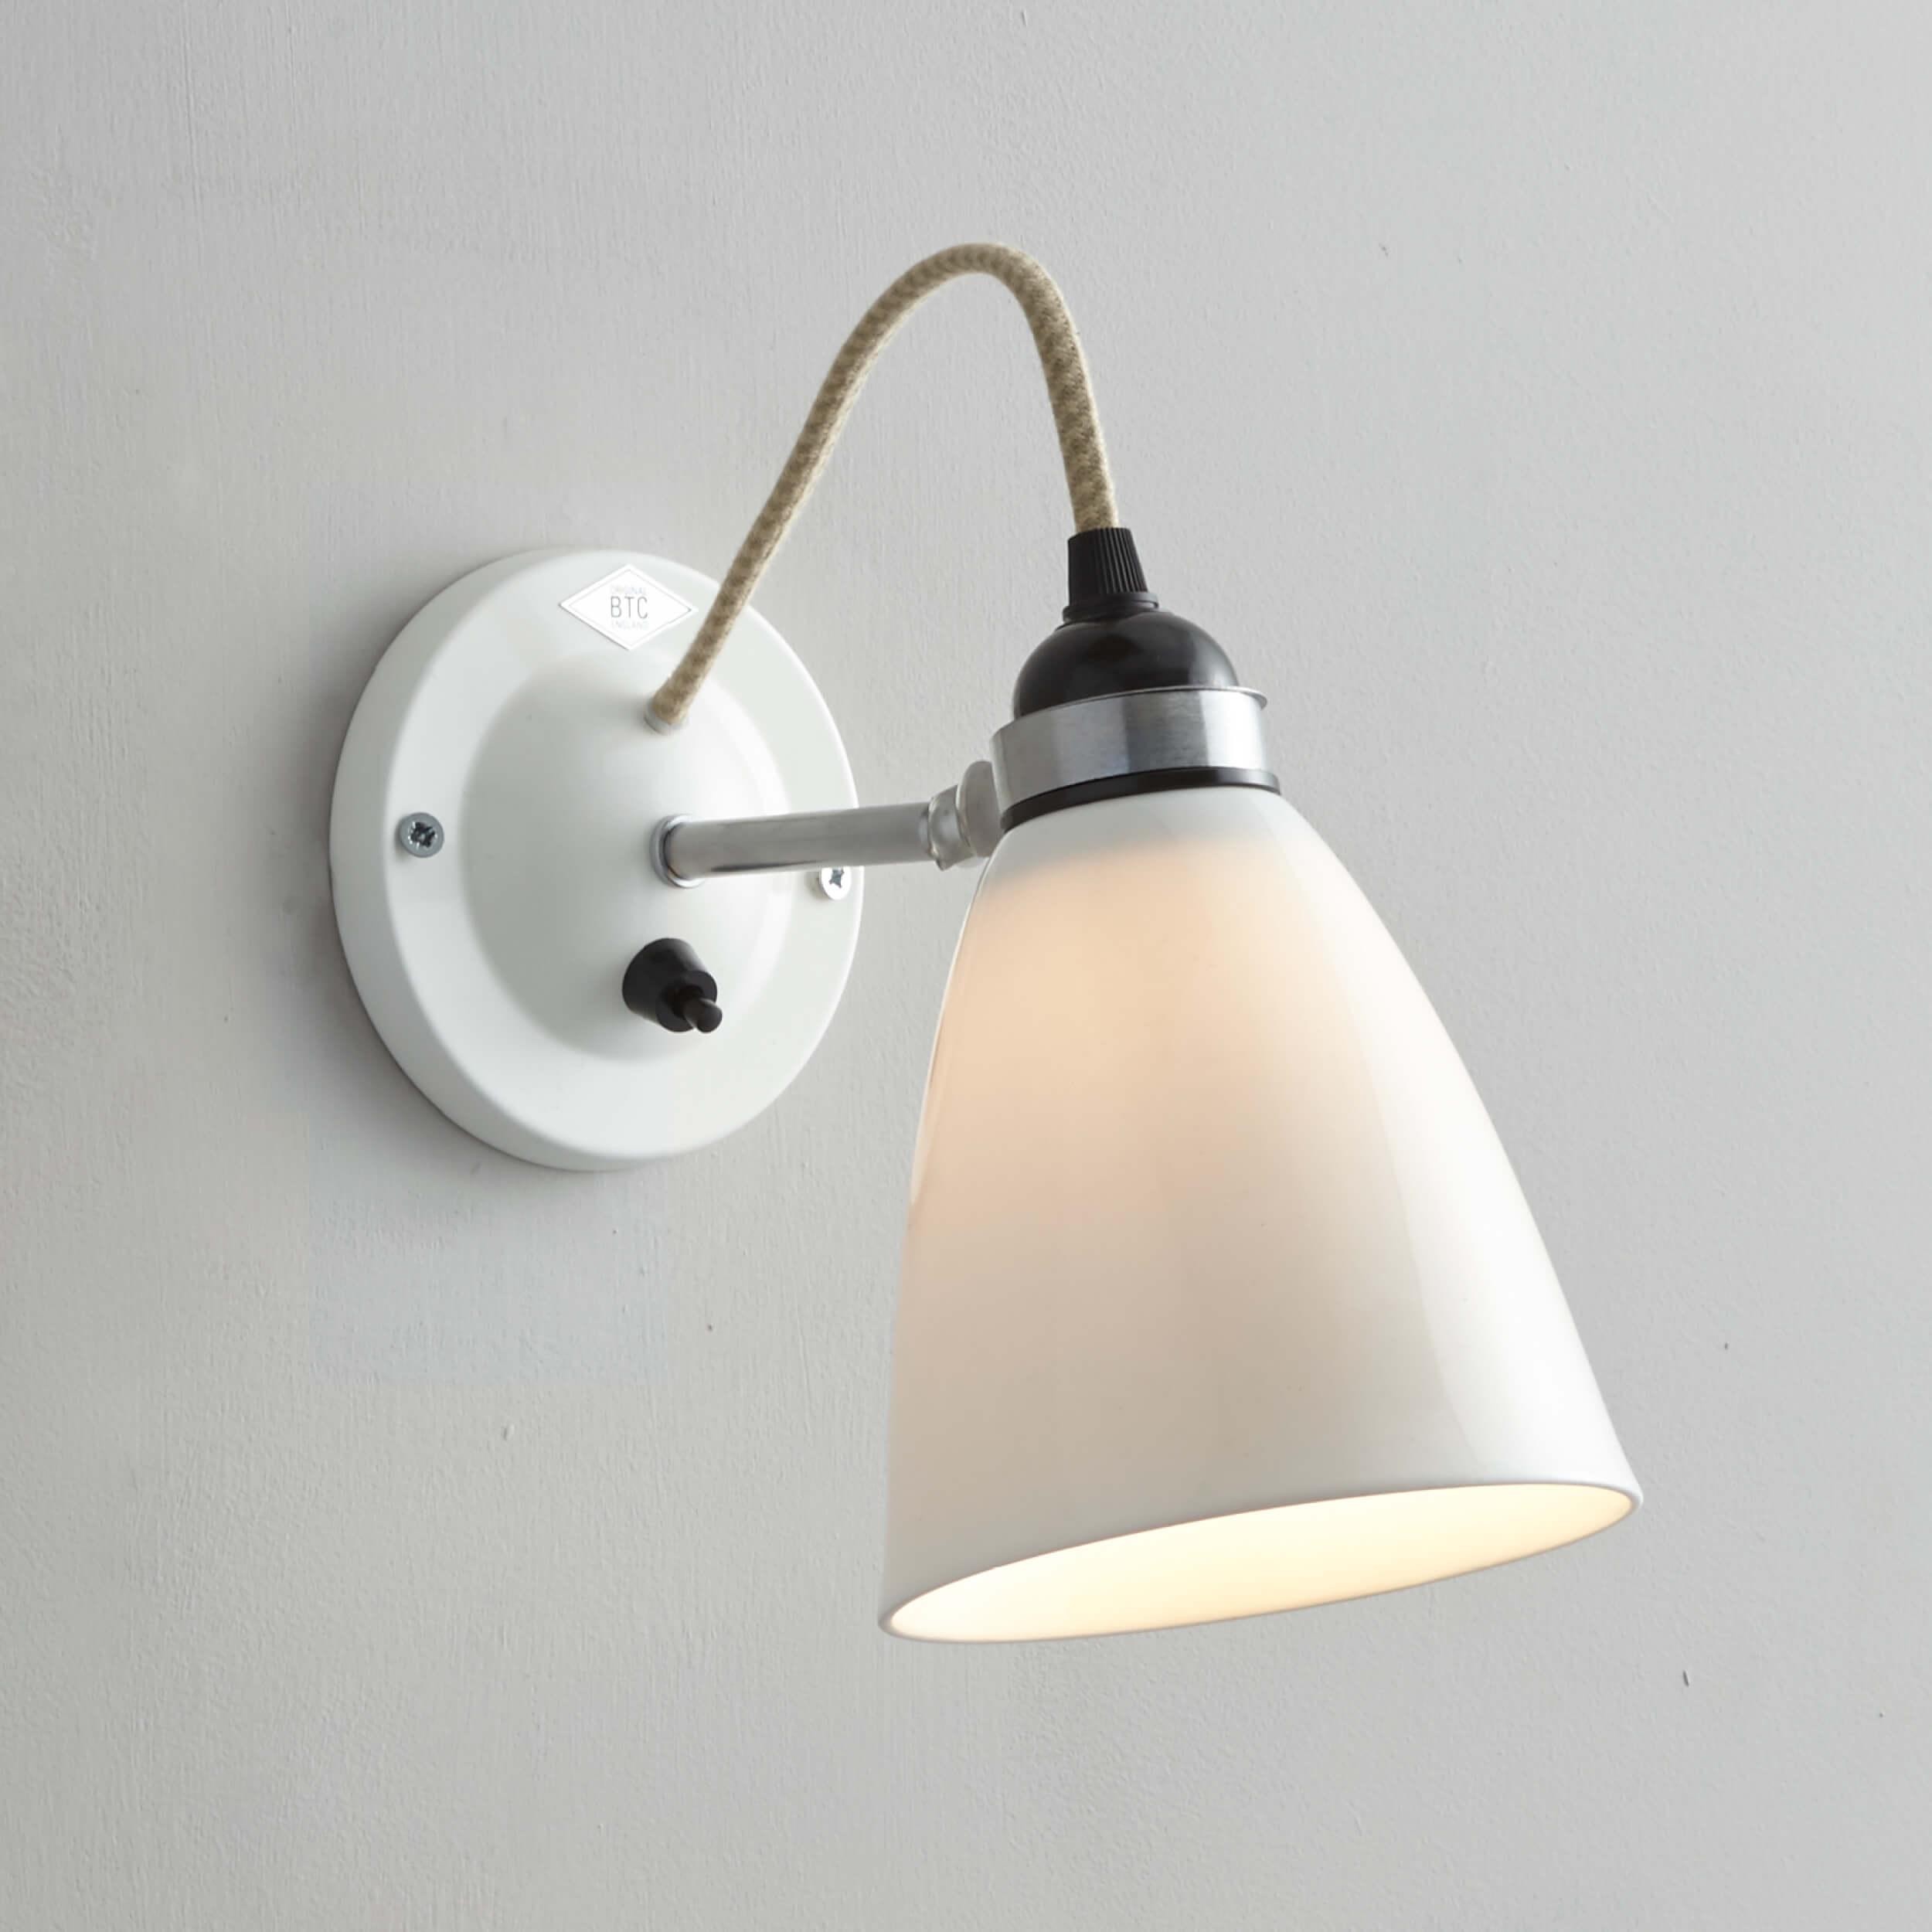 Original BTC - Hector Dome Switched Wall Light - US-FW397N | Montreal Lighting & Hardware